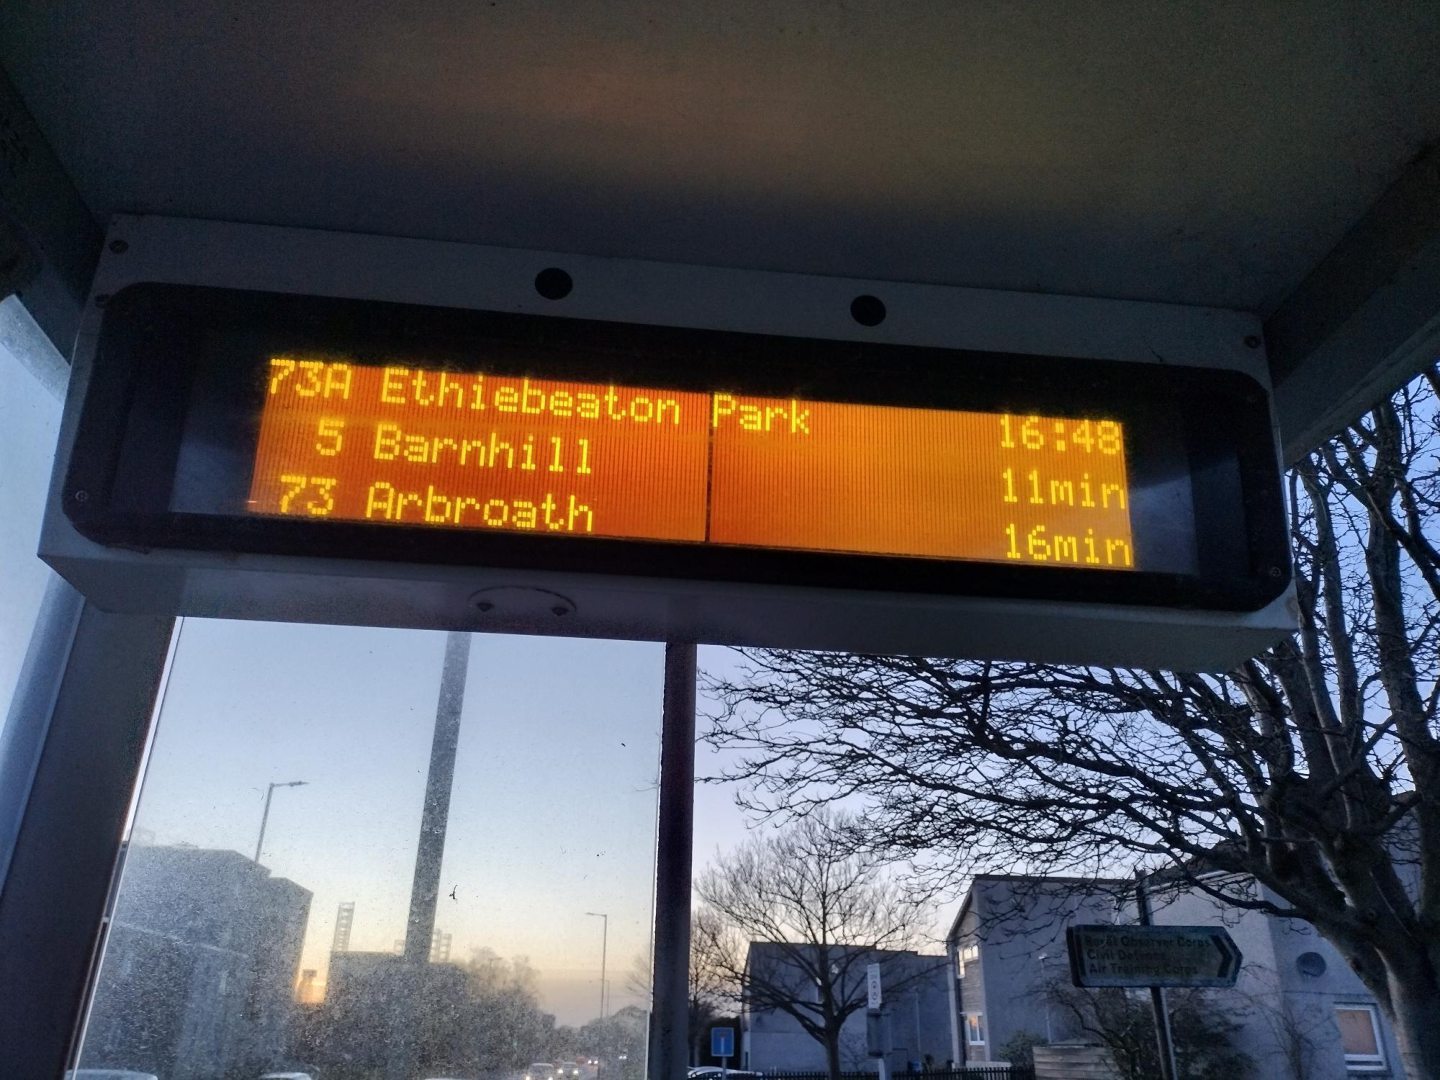 A bus in Broughty Ferry was cancelled 